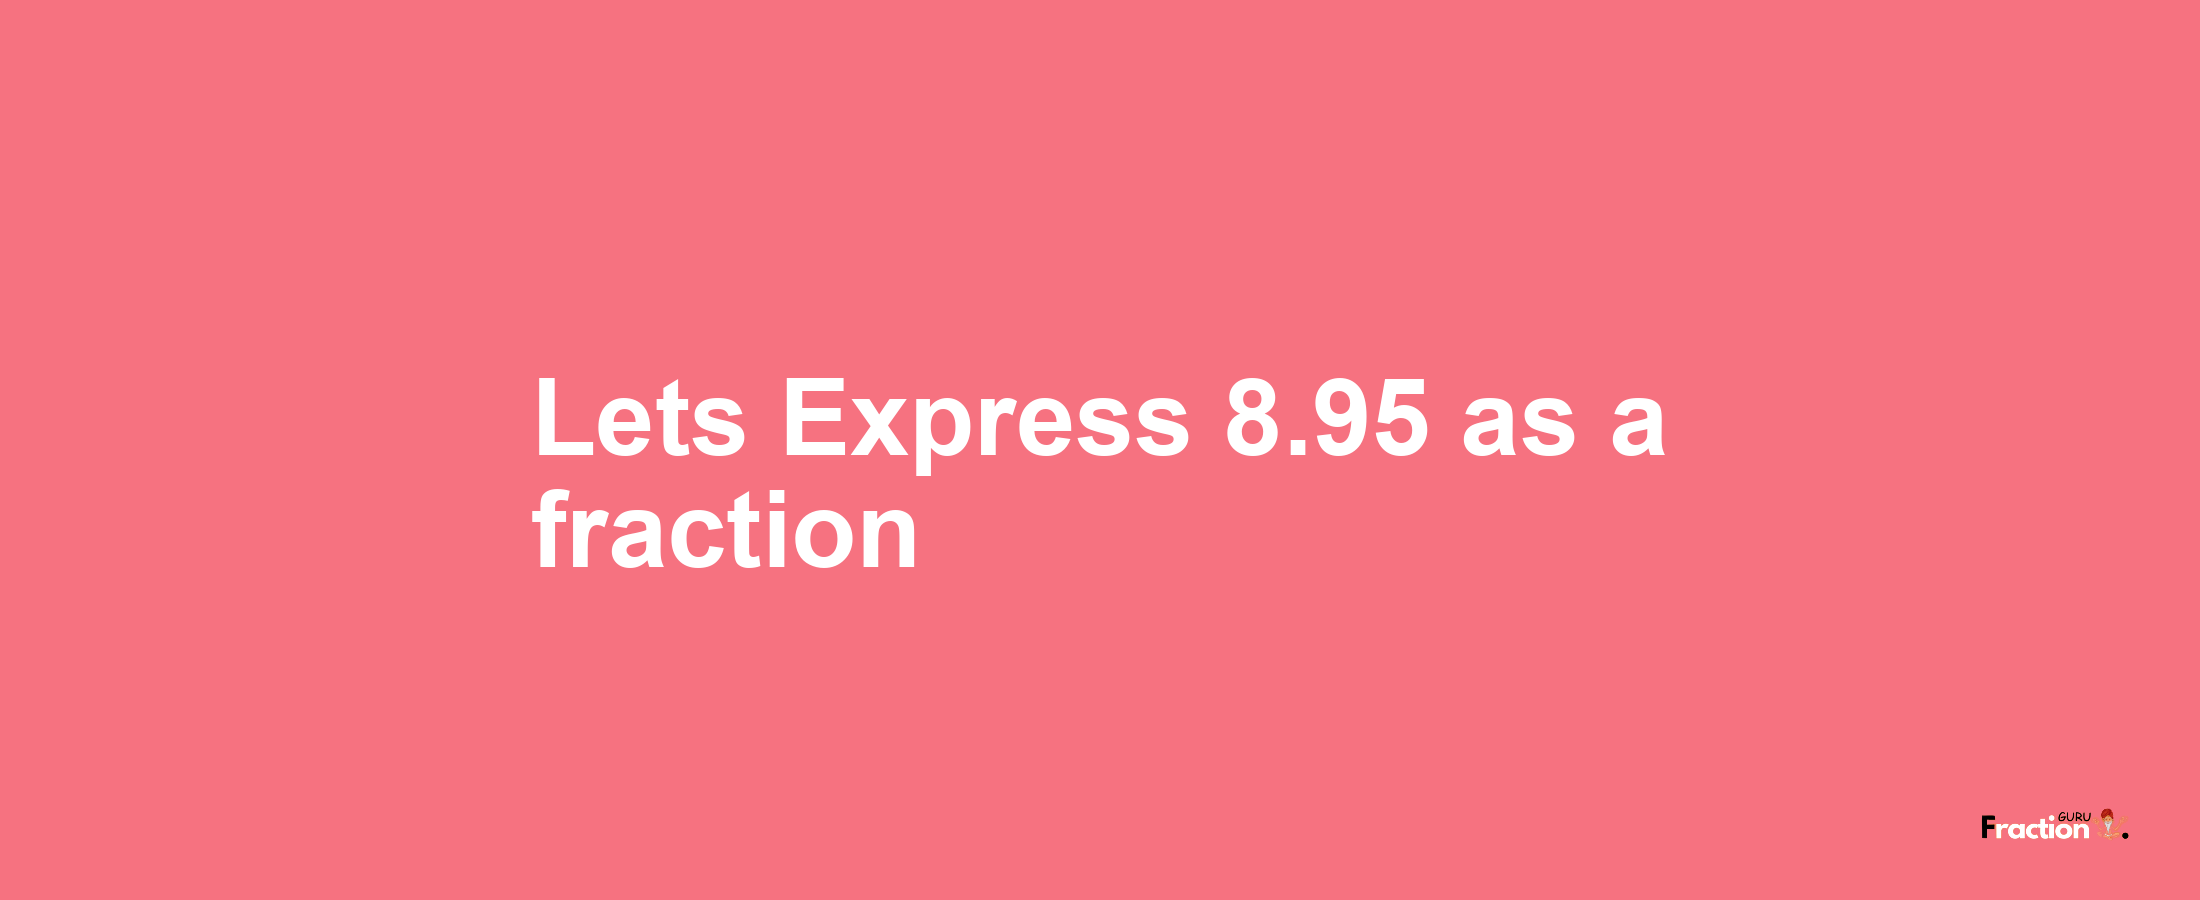 Lets Express 8.95 as afraction